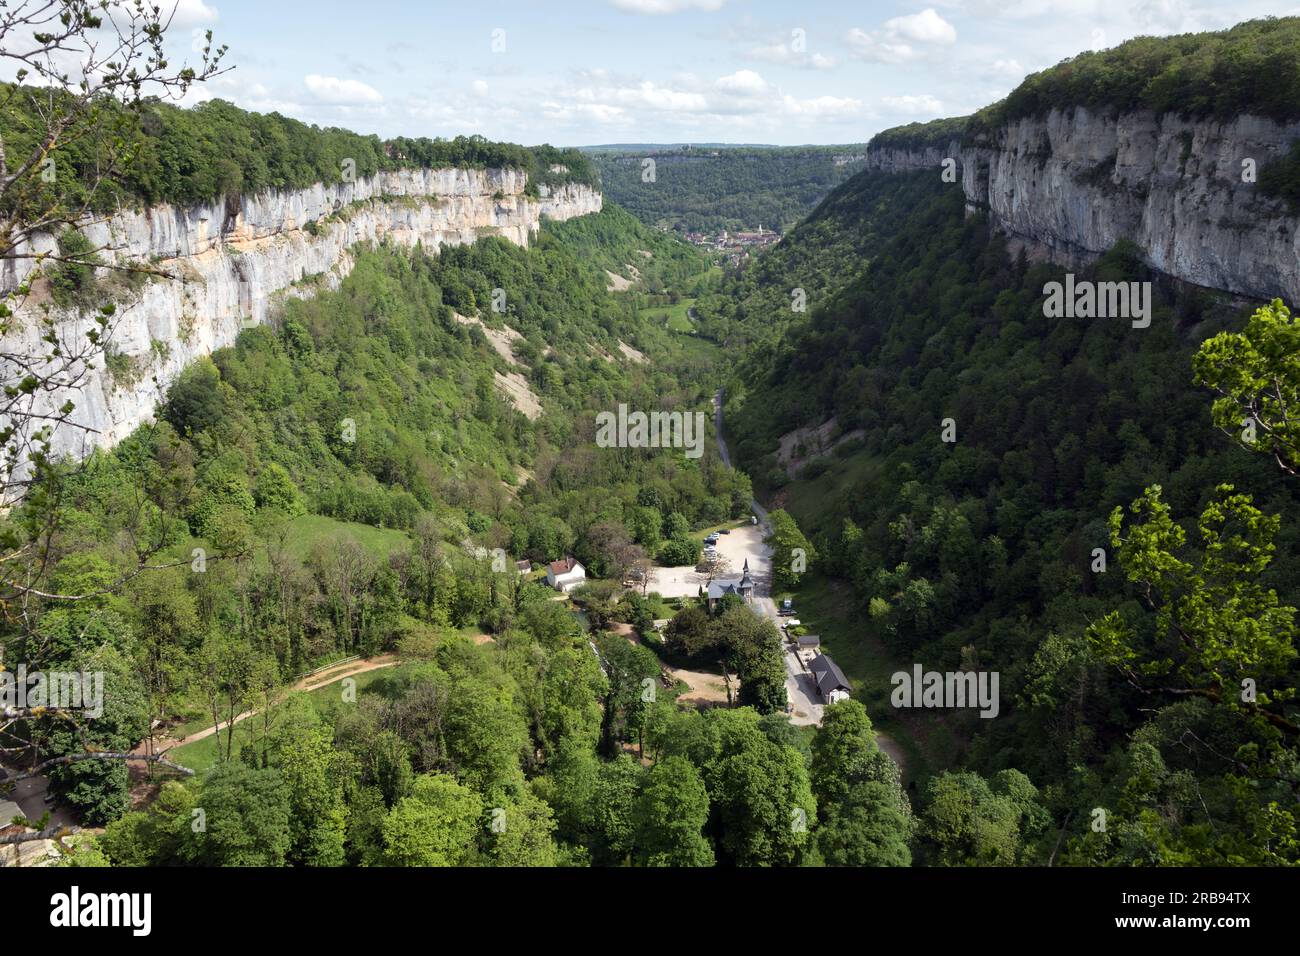 Baume-les-Messieurs and the Limestone Escarpments Surrounding the Village, Viewed from the Head of the Valley, Jura, Bourgogne-Franche-Comté, France Stock Photo